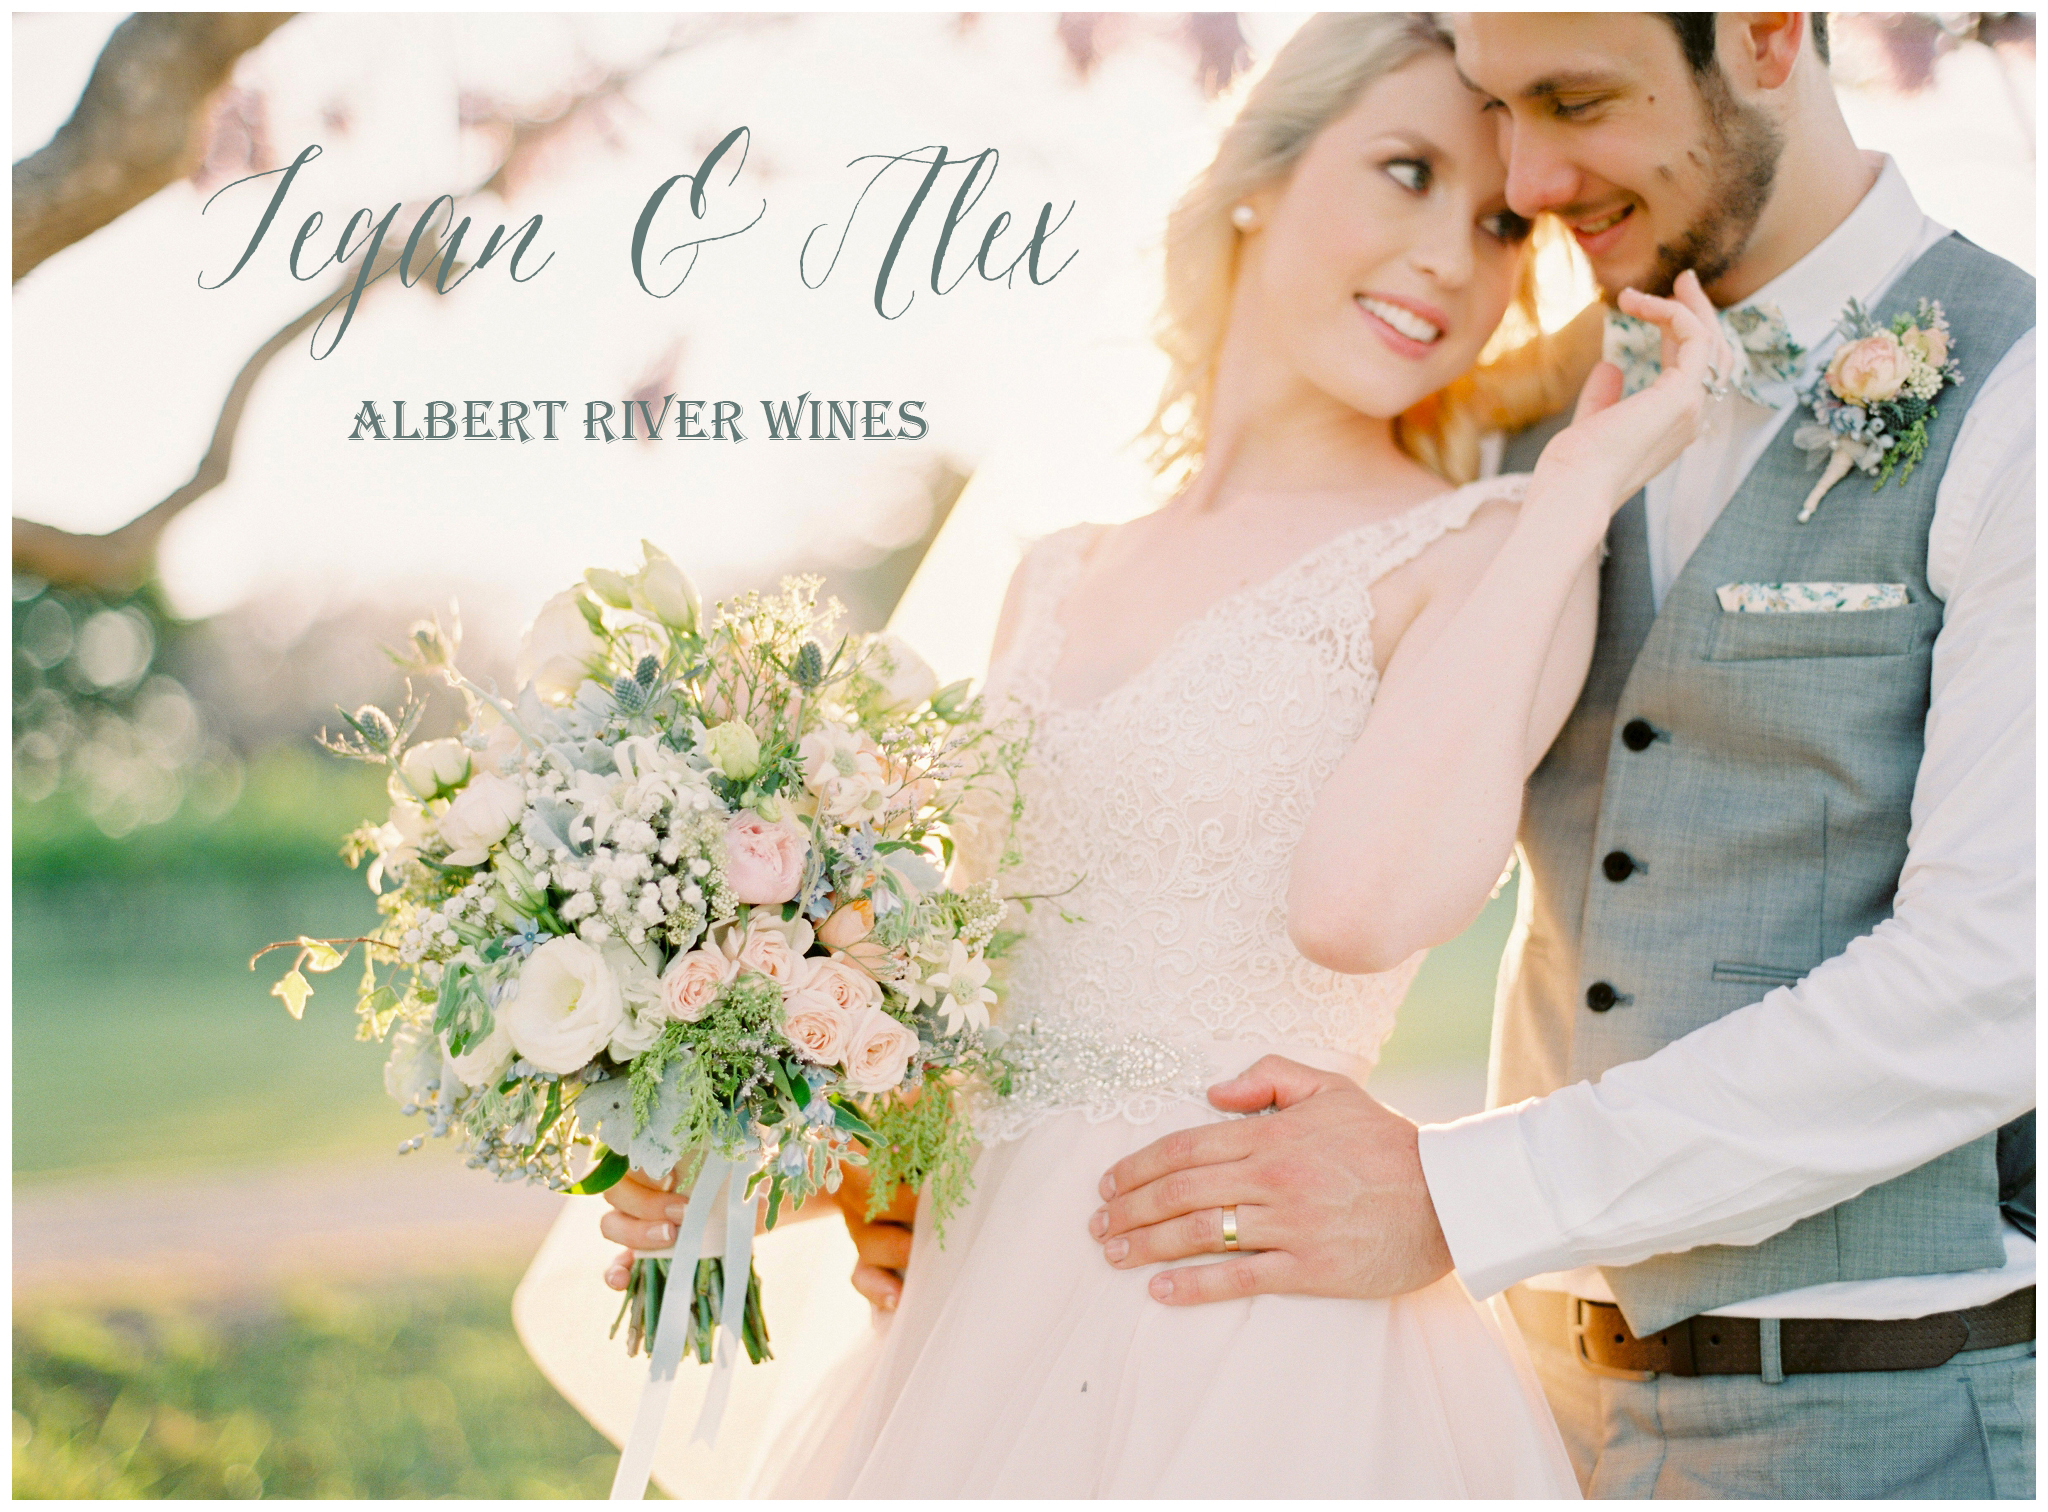 Tegan and Alex Wedding at Albert River Wines by Casey Jane Photography 1